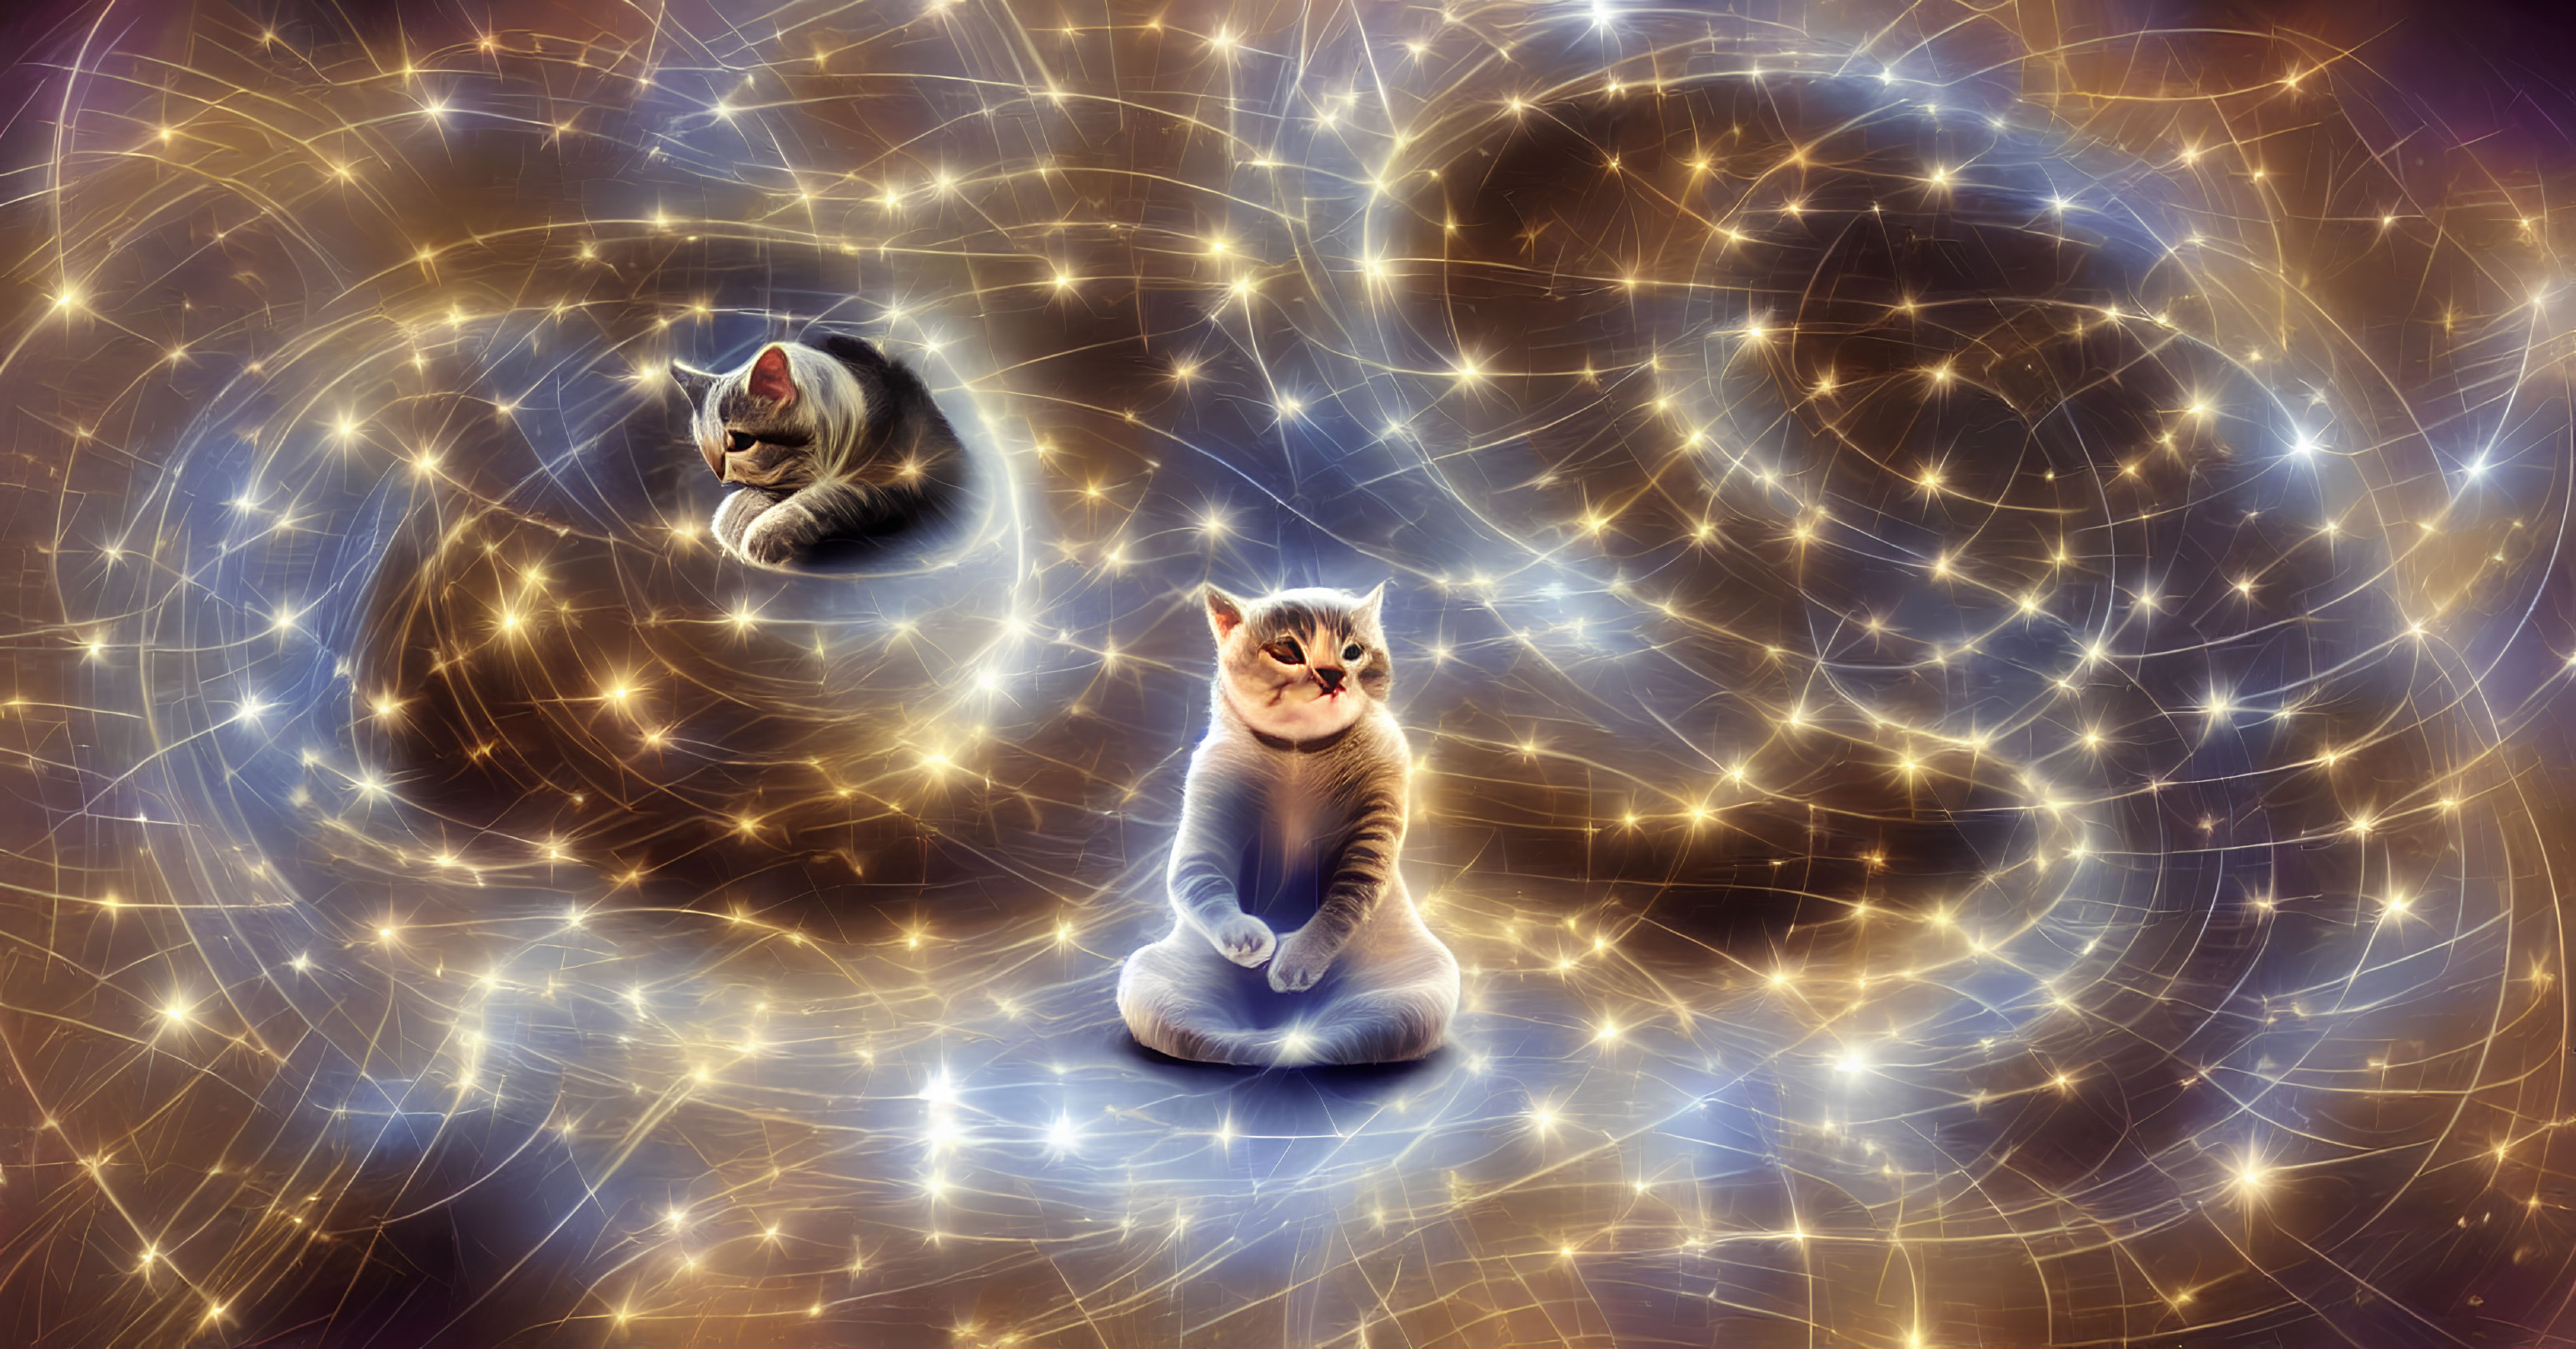 Digital Art: Two Cats with Cosmic Patterns and Swirling Lights